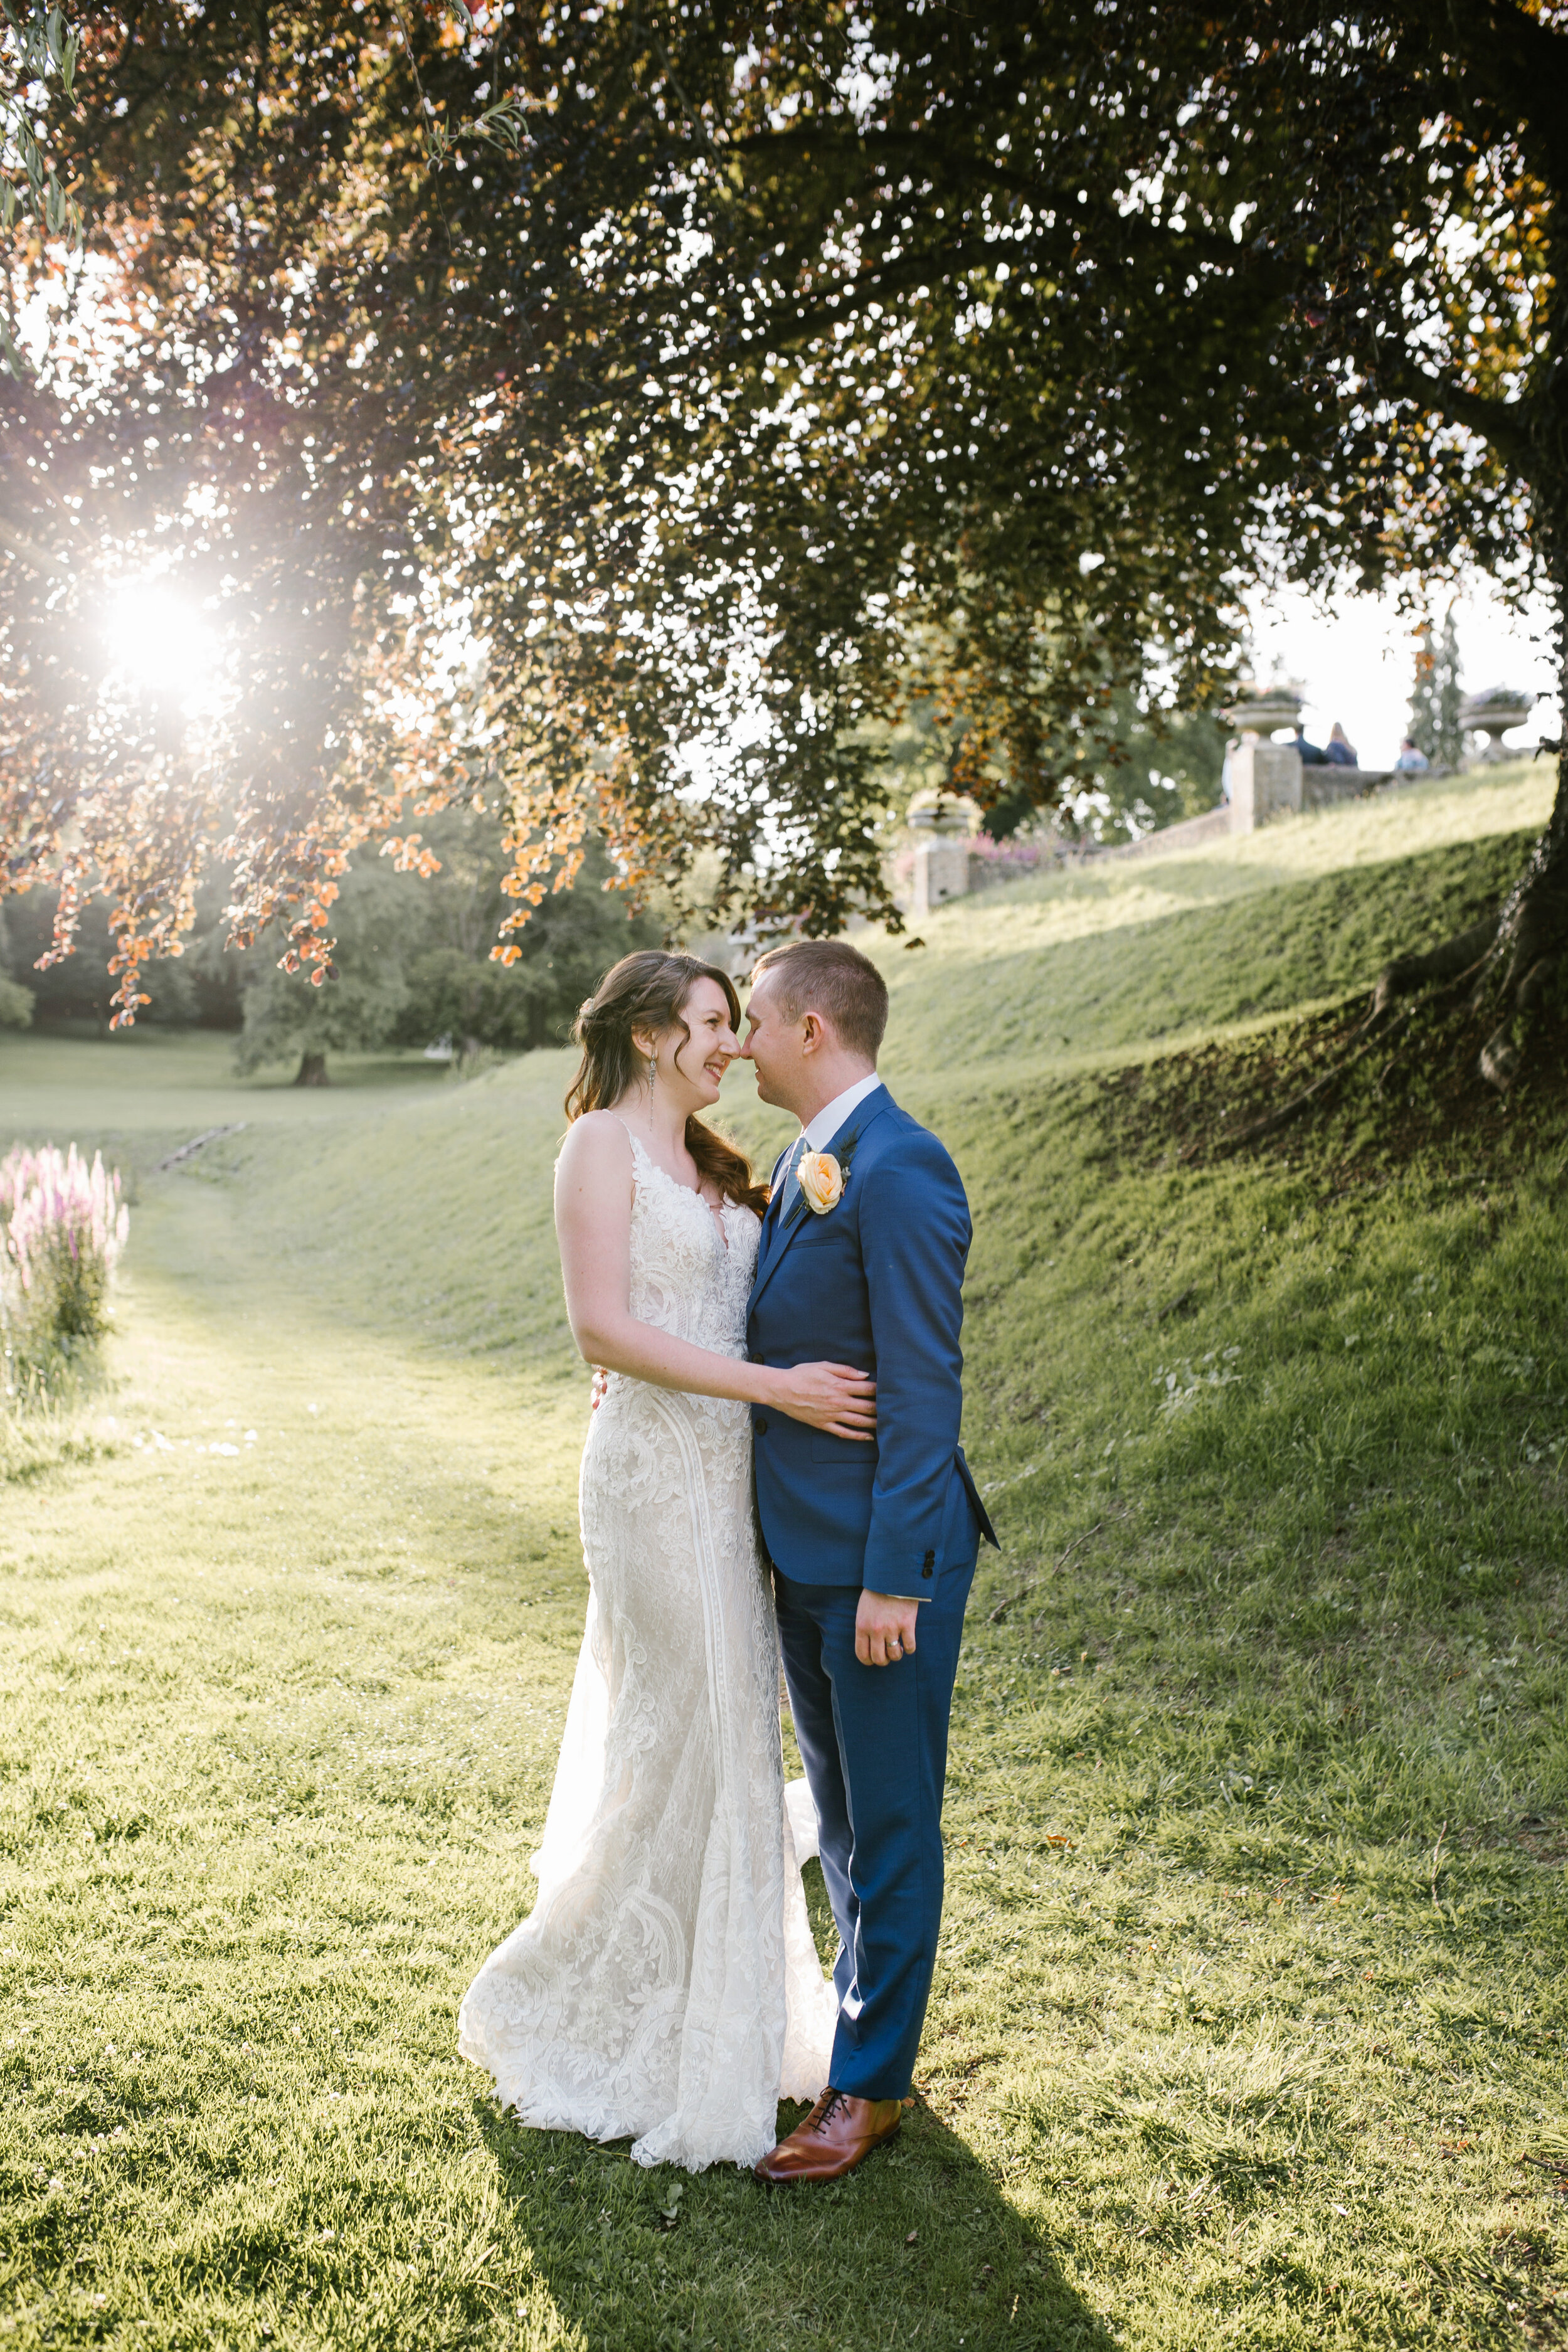 beautiful portarit of bride and groom smiling together in golden hour at cowley manor